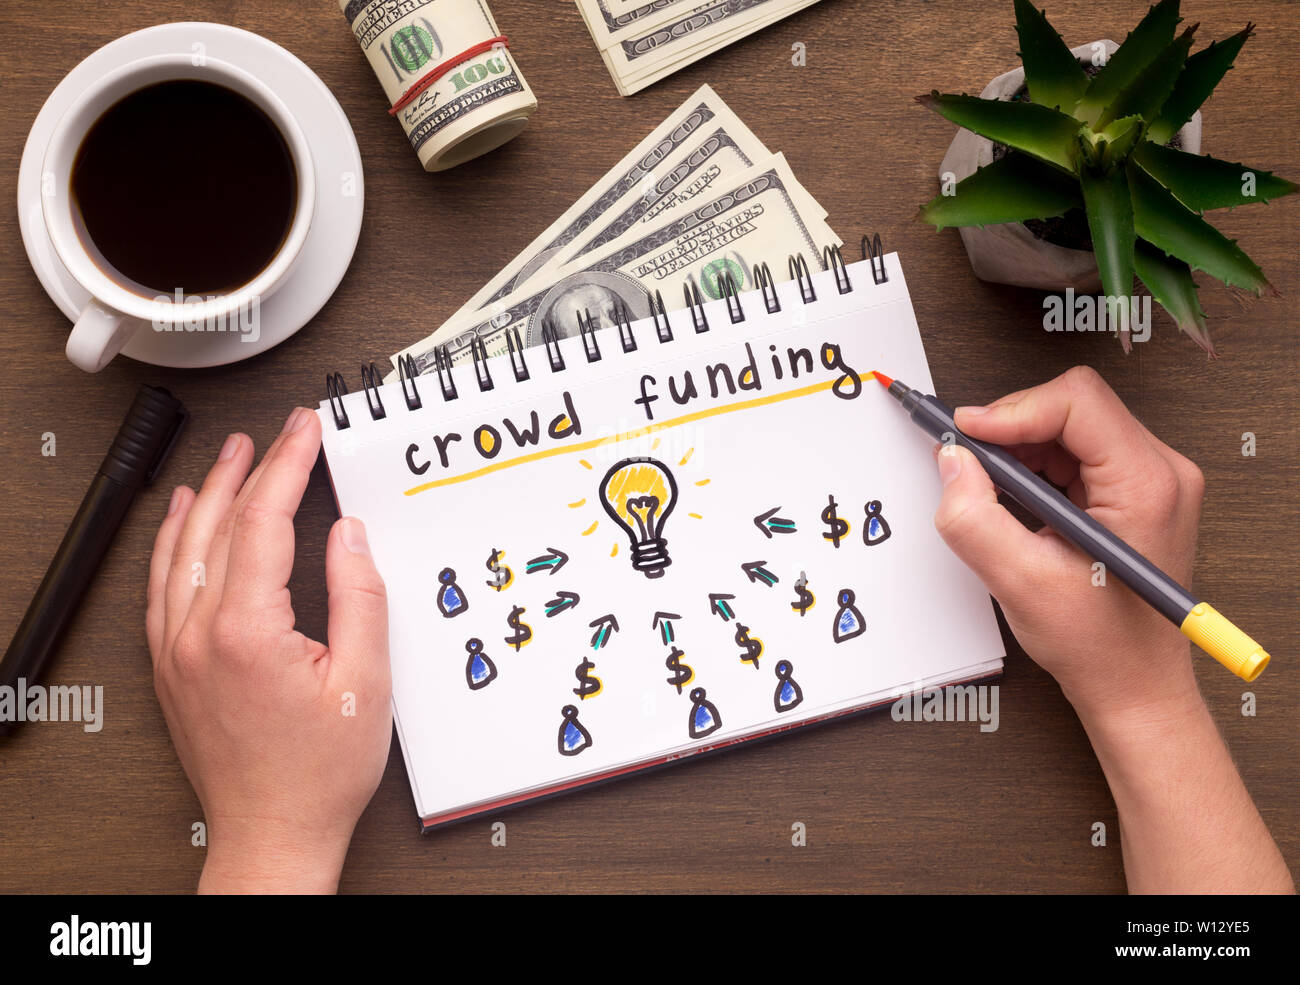 Woman hand writing in notebook crowdfunding sign on table Stock Photo